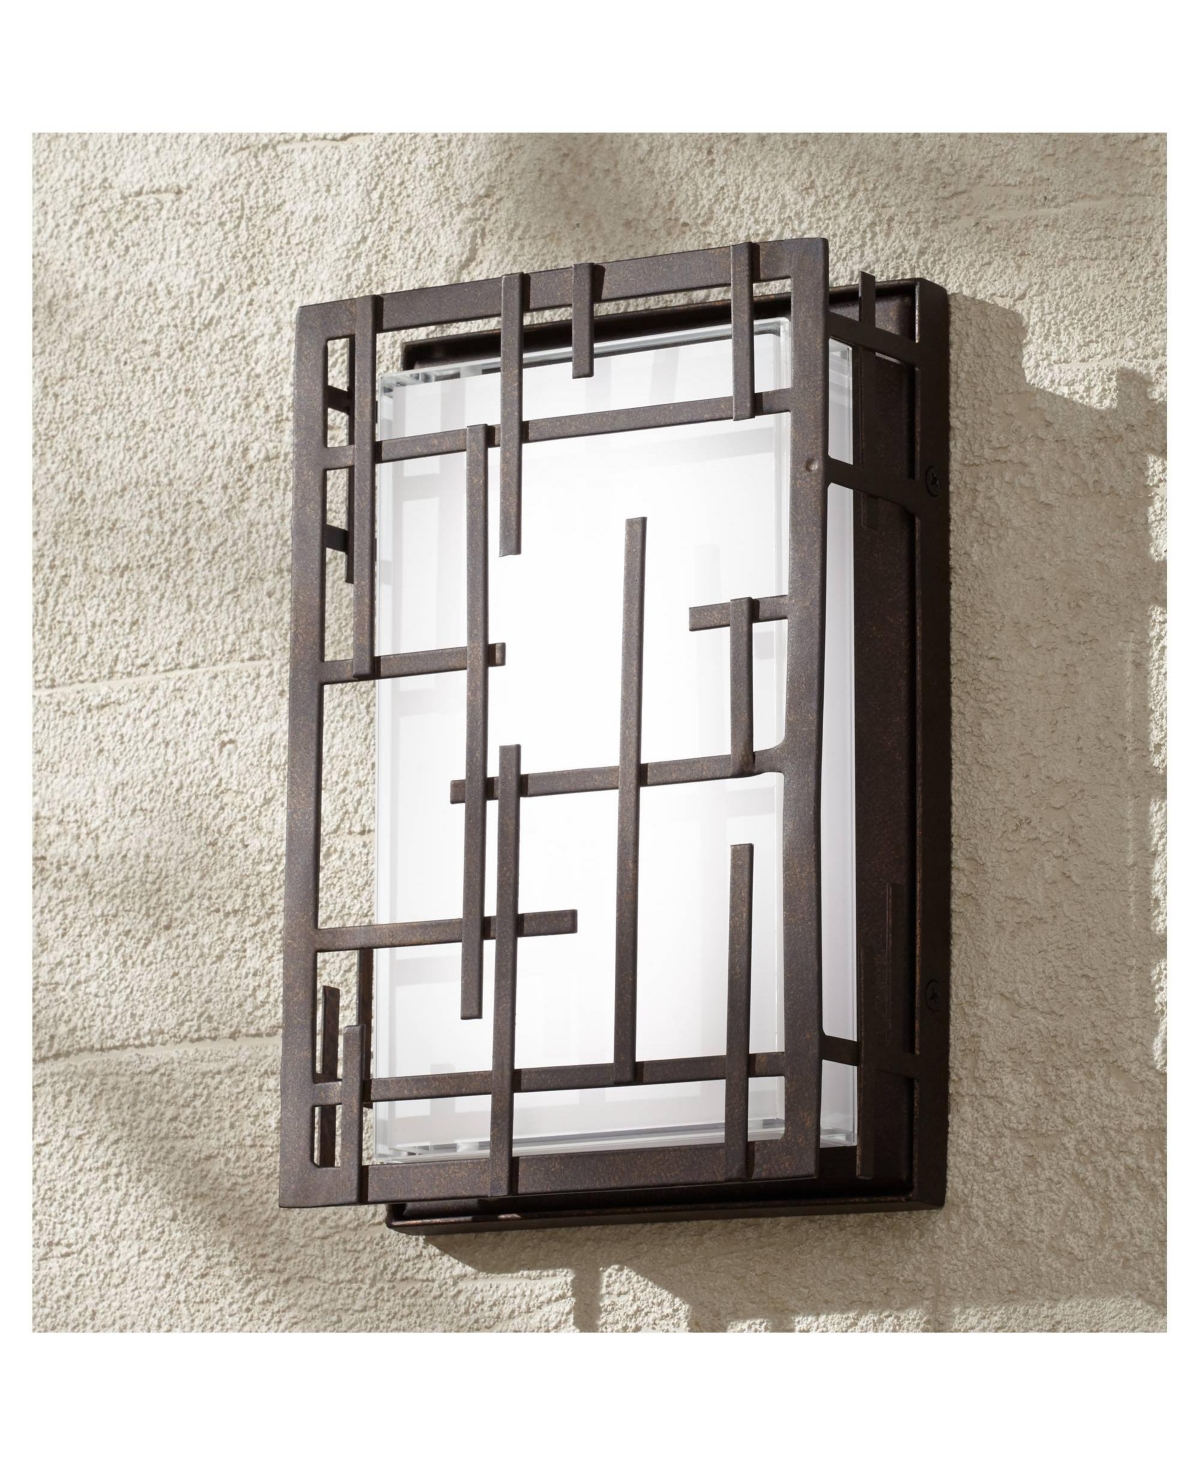 Modern Lines Outdoor Wall Light Fixture Led Dimmable Bronze Grid Frame 9 1/4" White Cased Glass for Exterior House Porch Patio Outside Deck Garage Yar